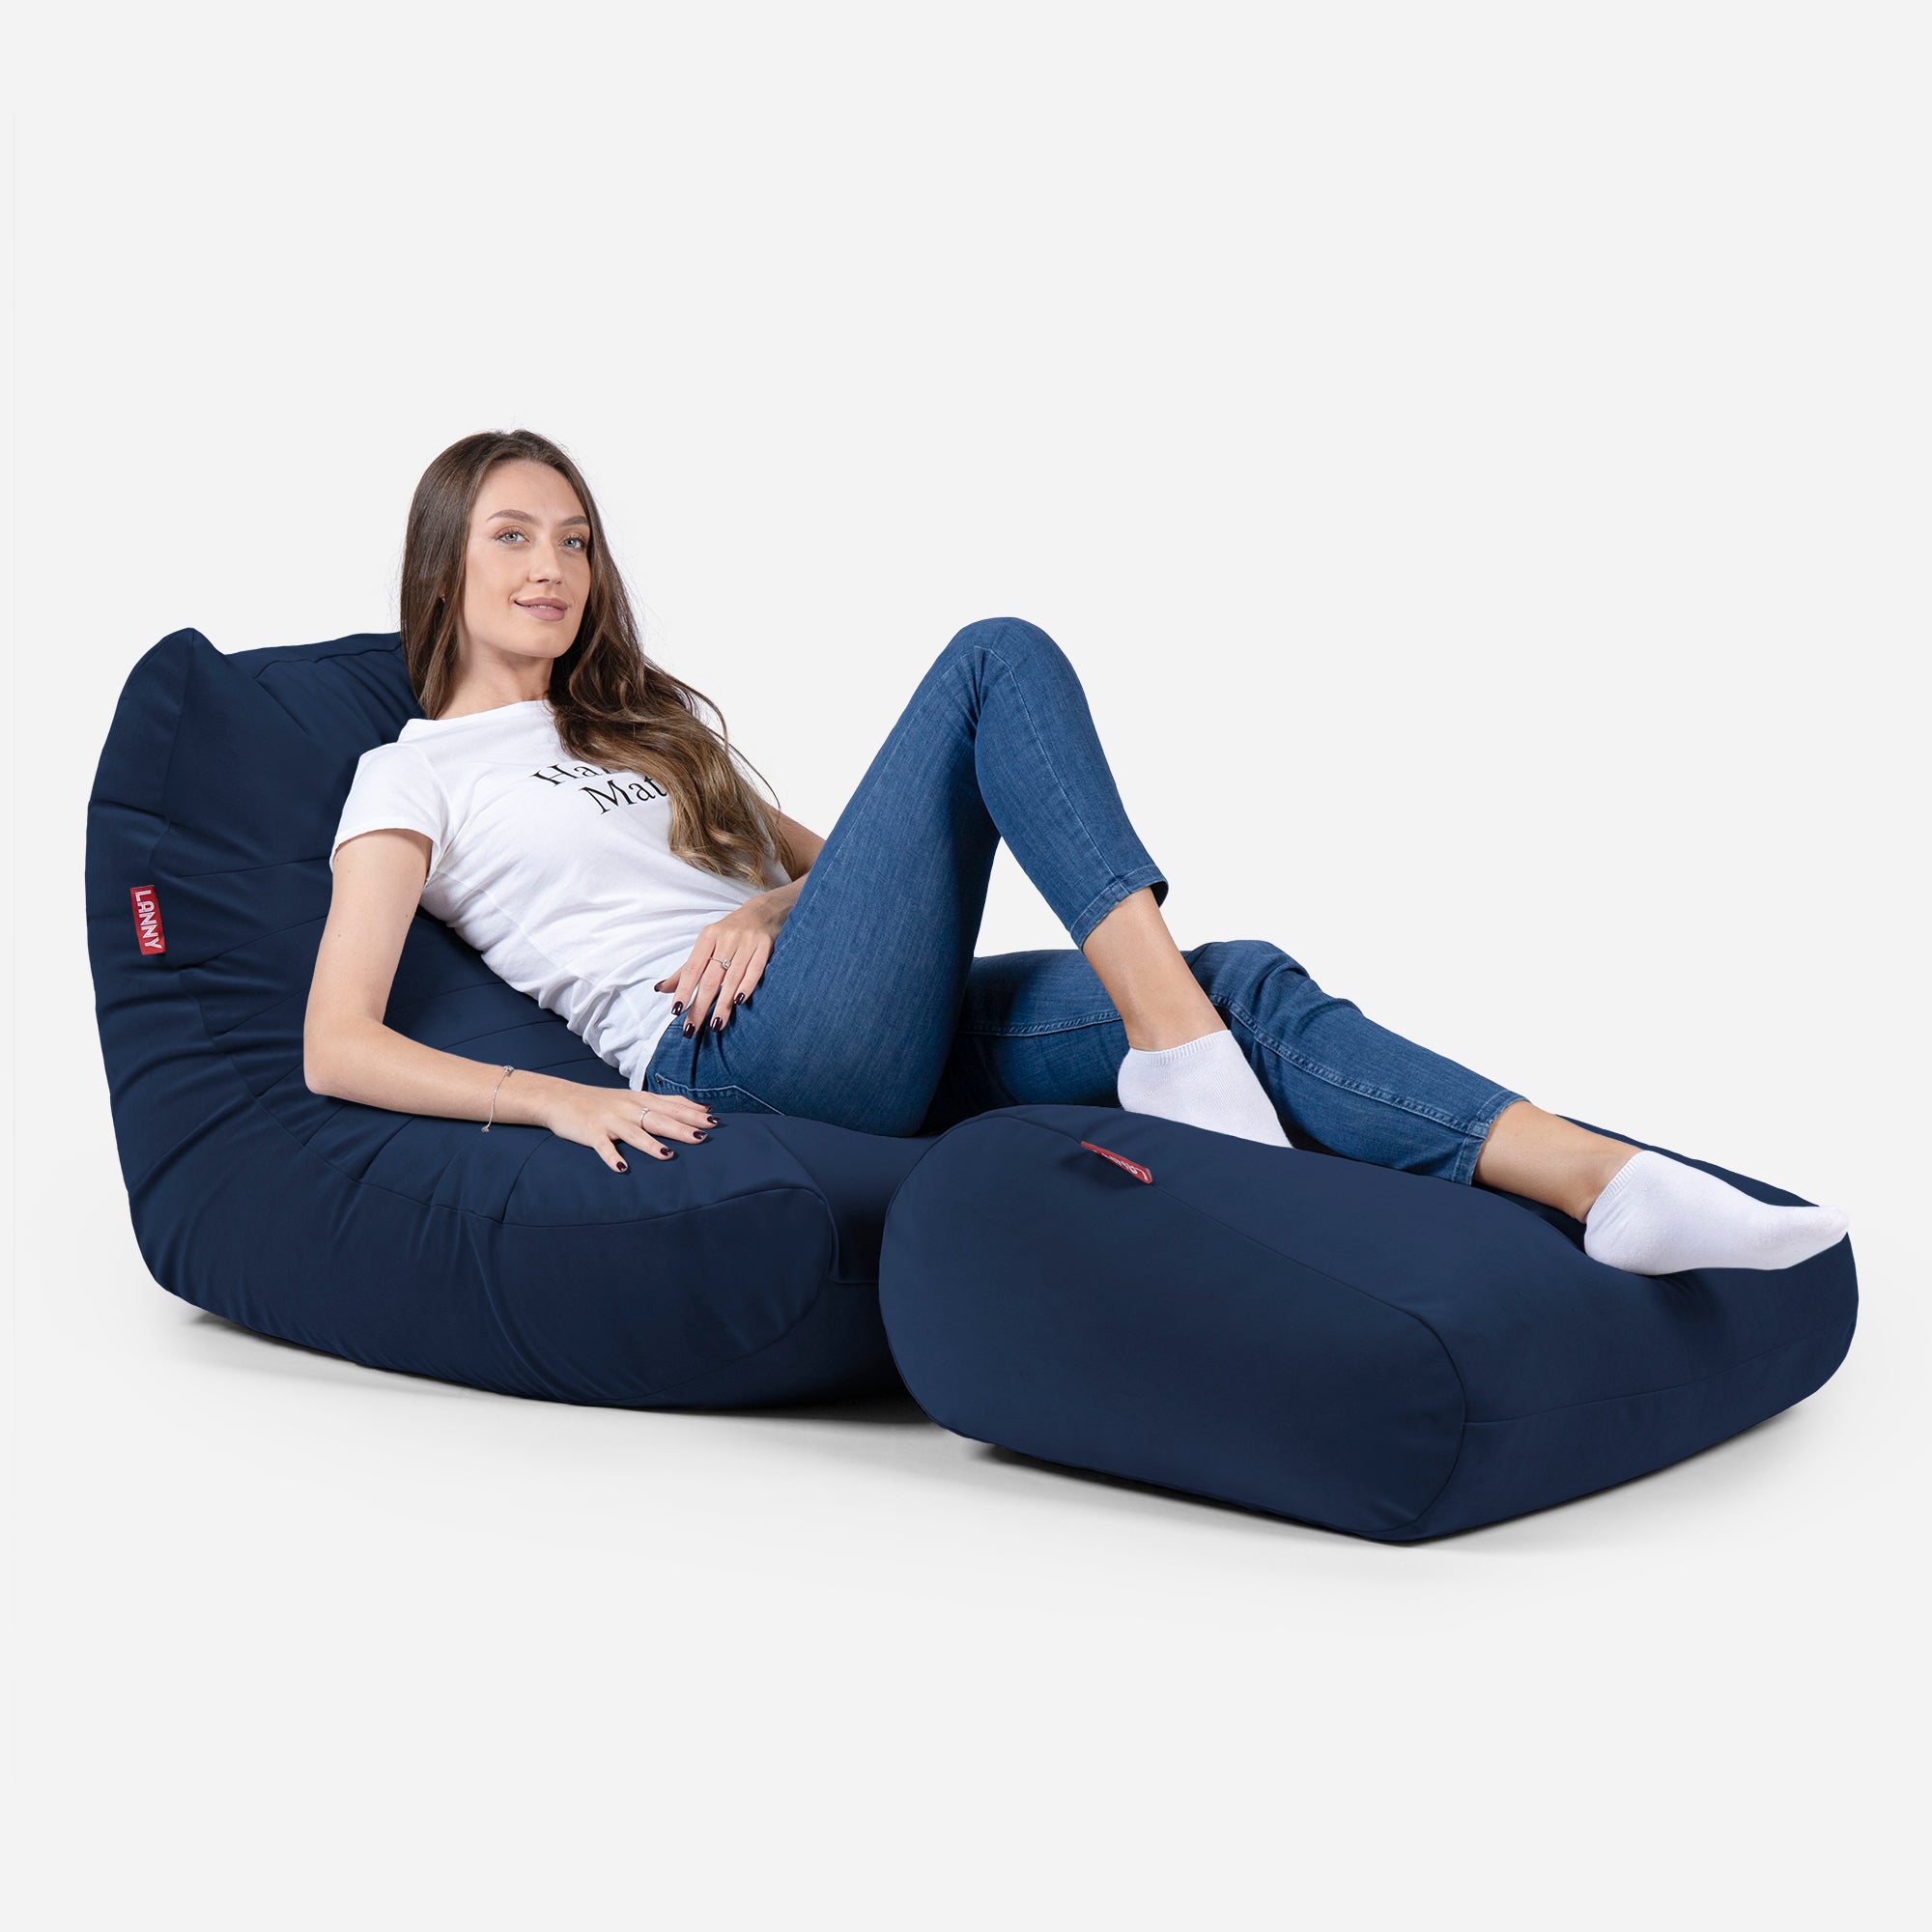 Beanbag Curvy Design Blue color with girl seating on it 